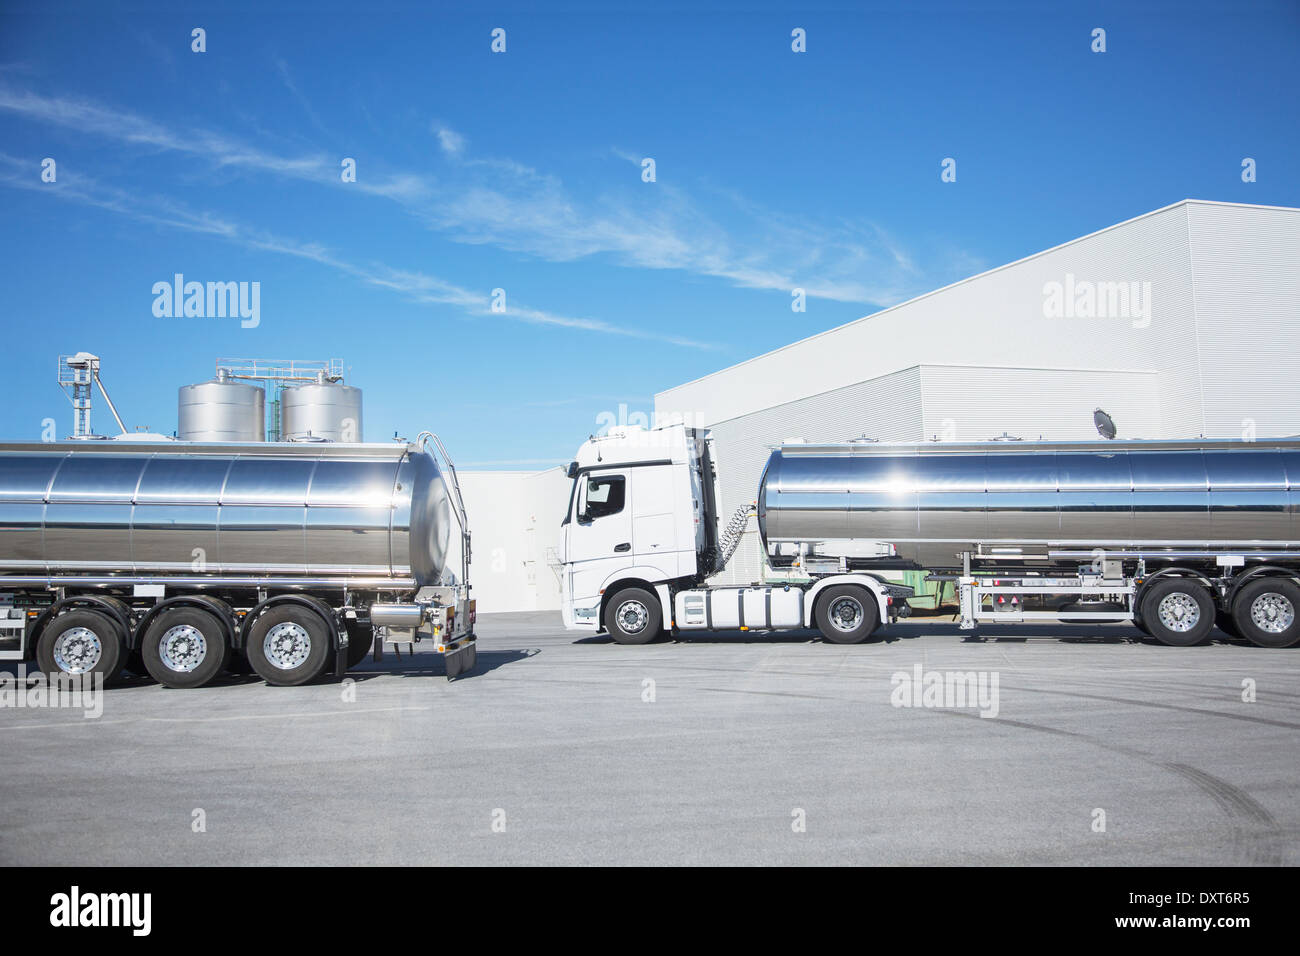 Stainless steel milk tankers parked Stock Photo